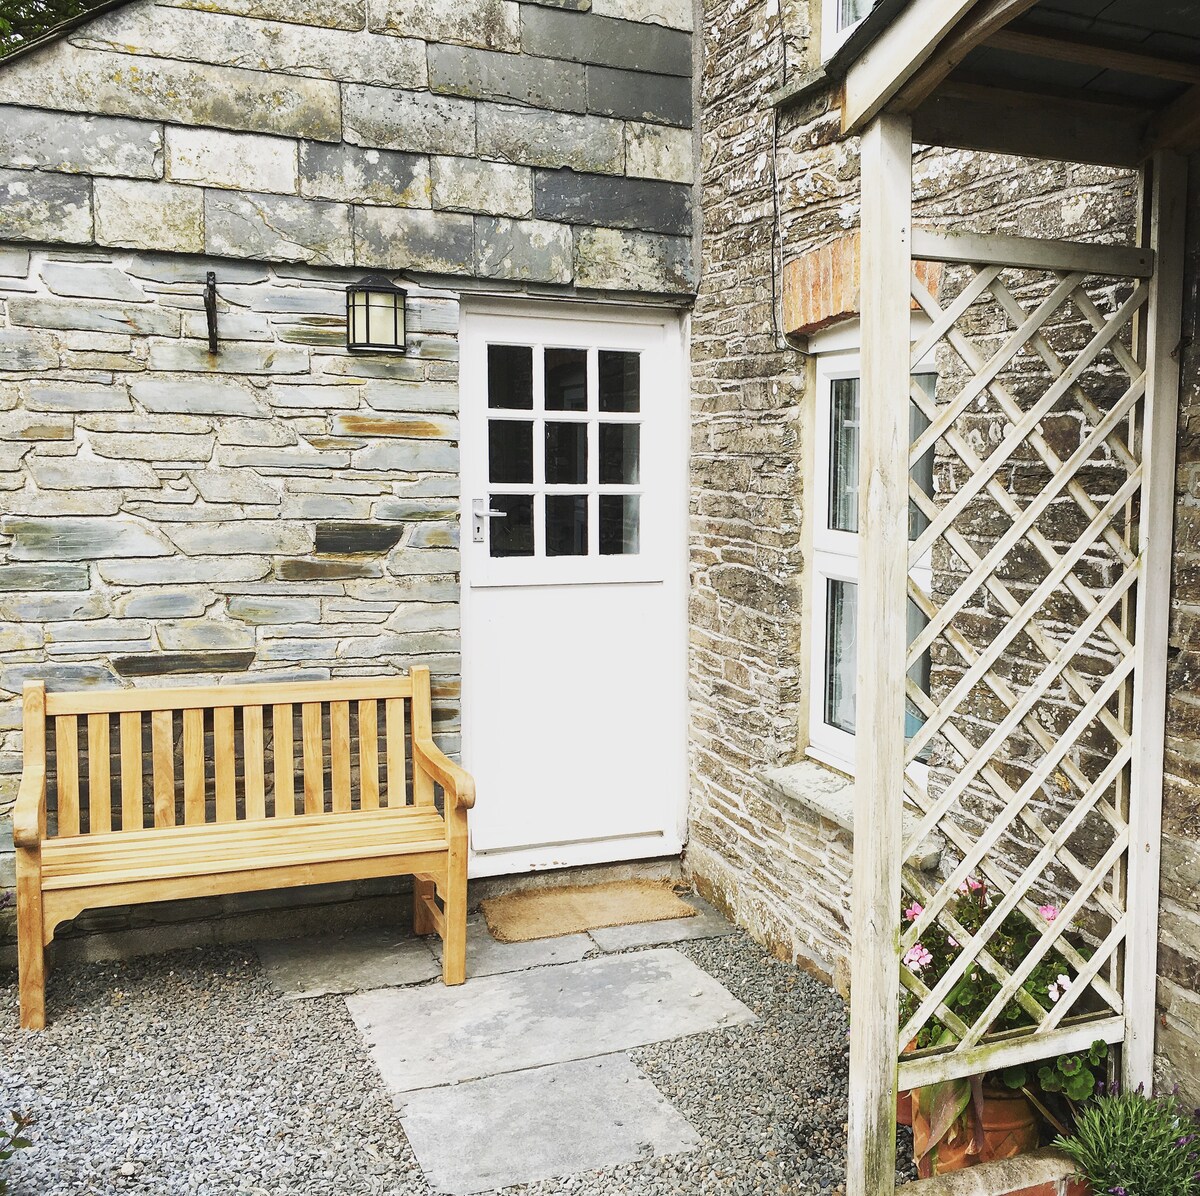 Charming Cornish cottage and converted barn.